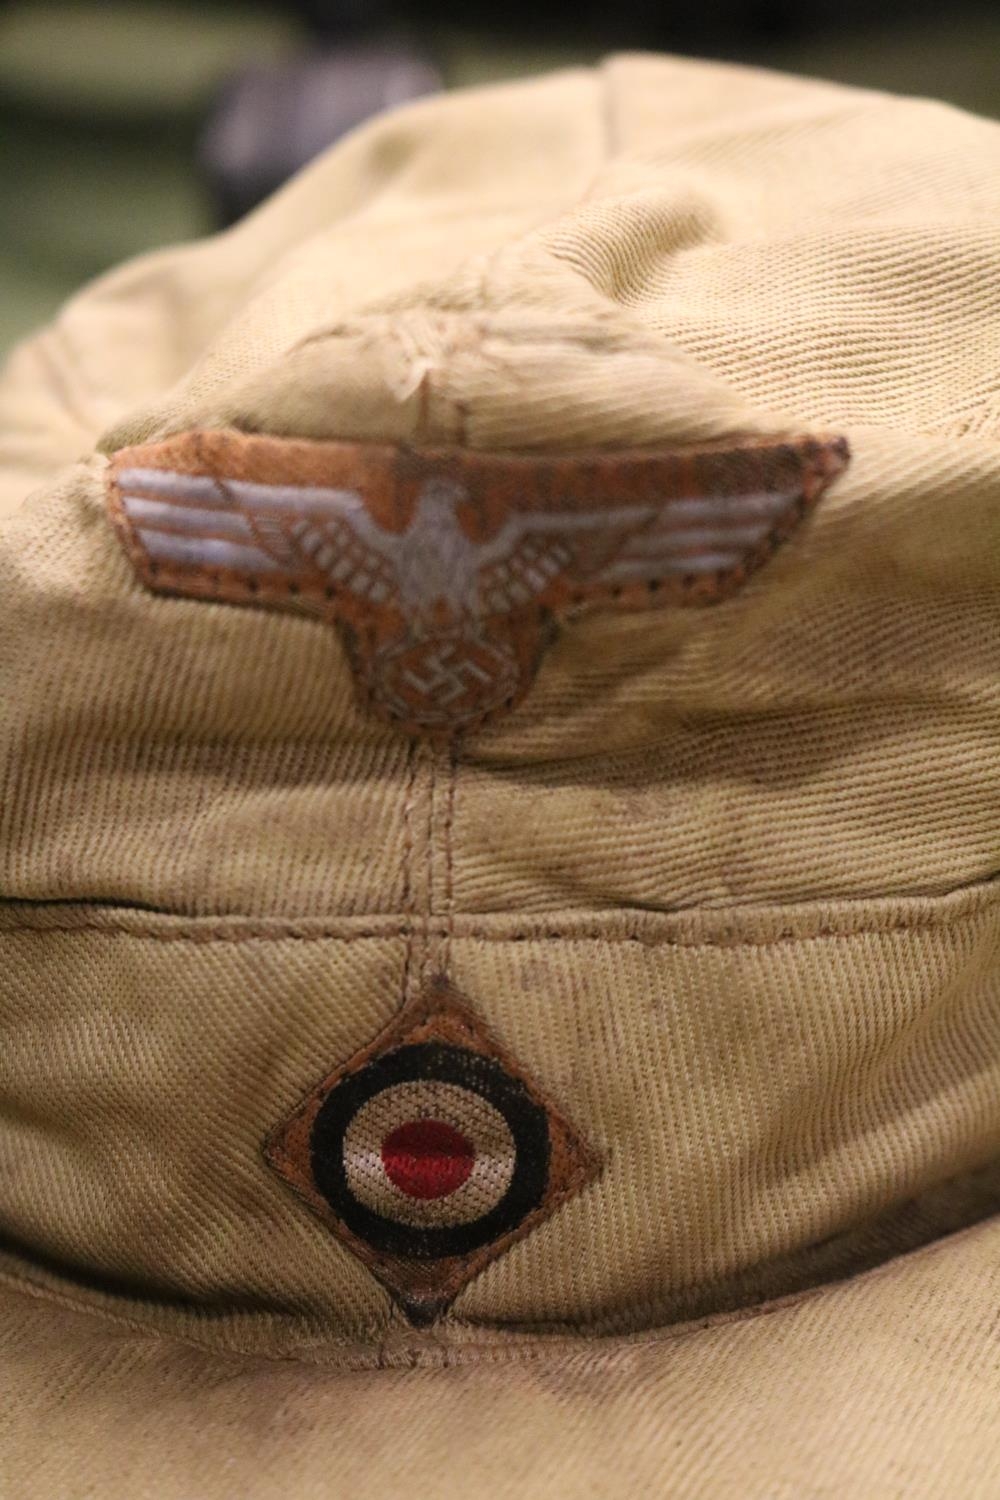 WWII German Third Reich Panza officers African corps tunic with cap dated 1941 - Image 6 of 8